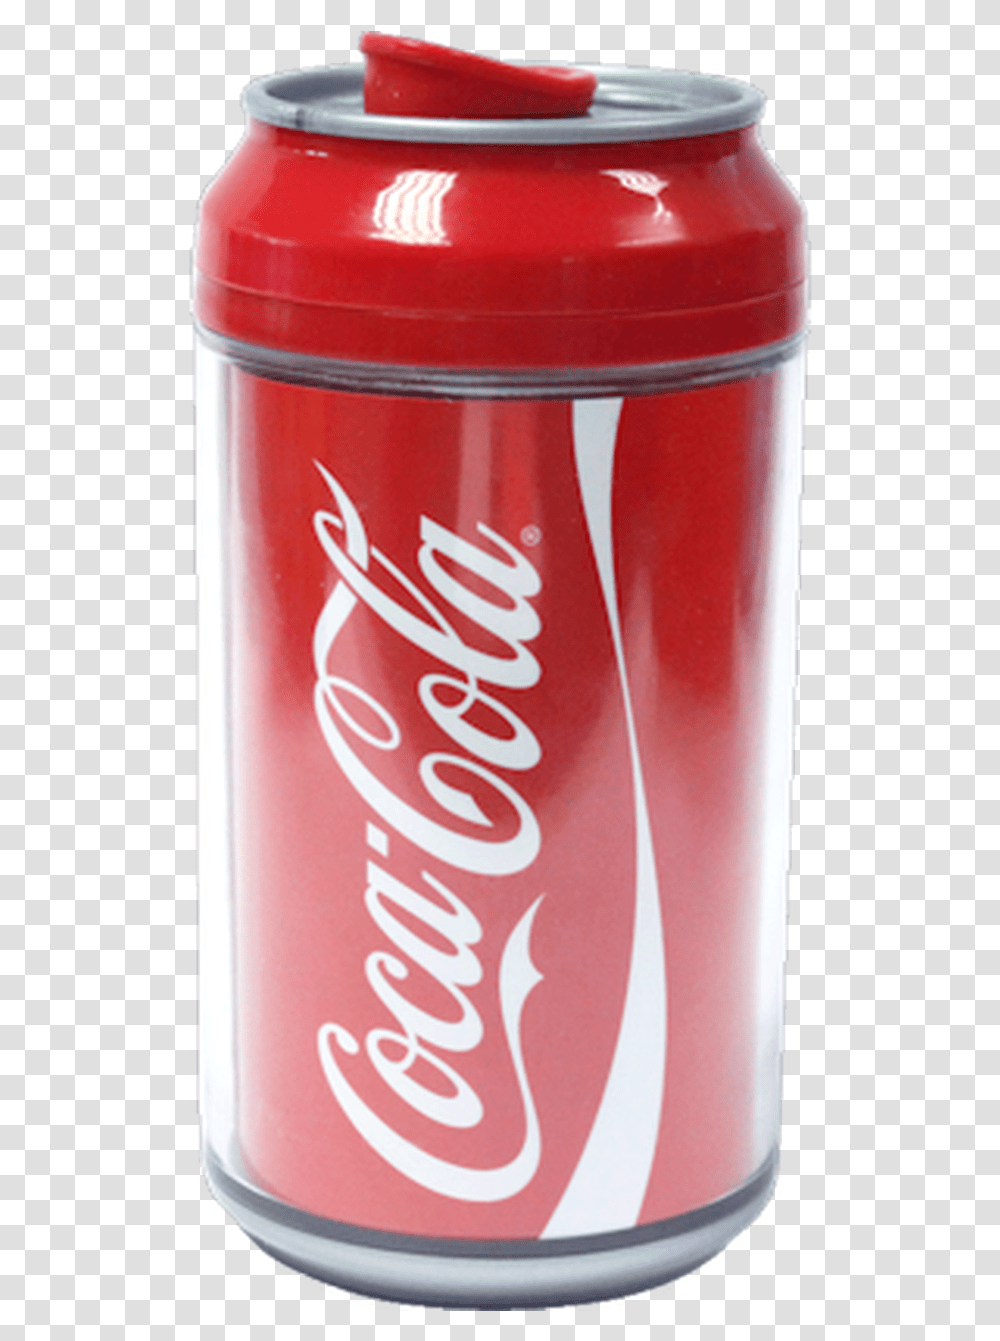 Cool Gear Coke Cola Can 12oz Red Dyfbw215 Coca Cola, Beverage, Drink, Soda Transparent Png